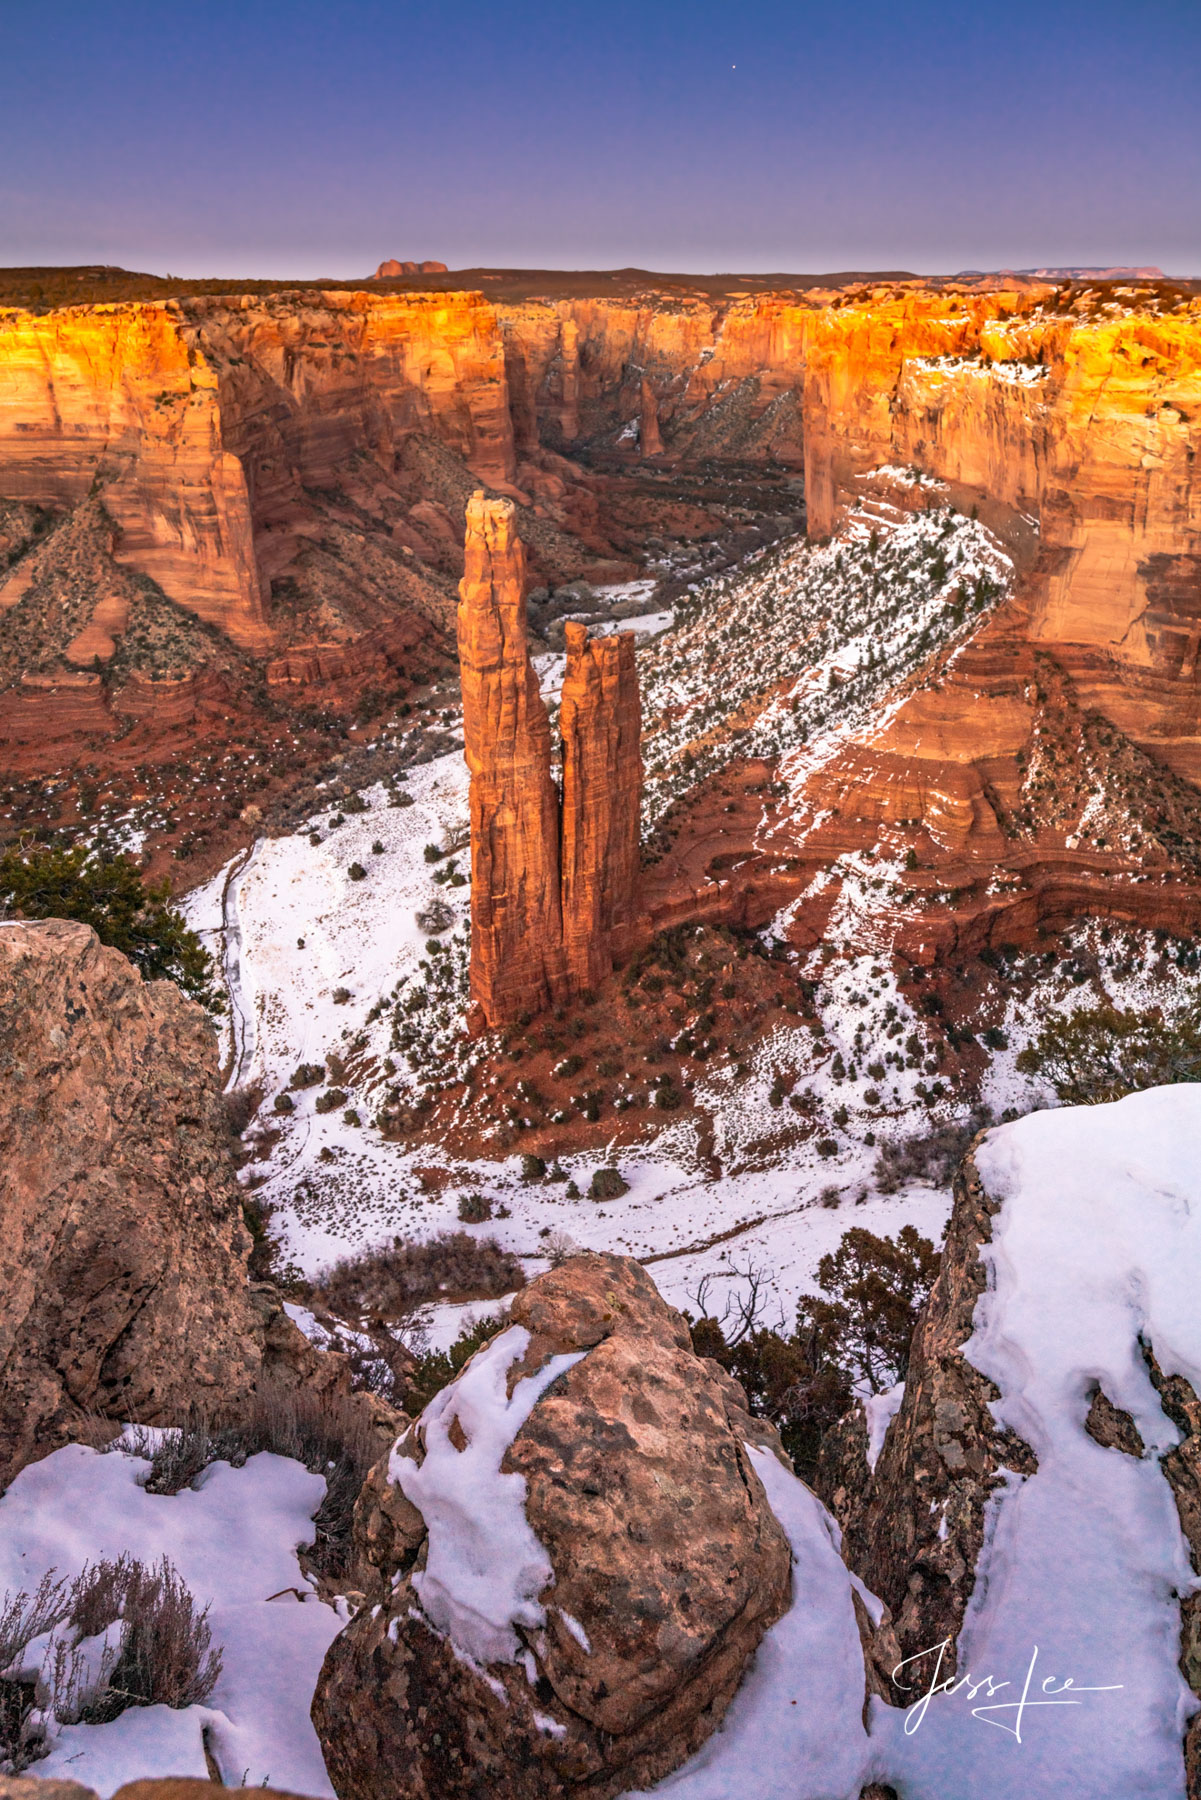 Limited Edition of 50 Exclusive high-resolution Museum Quality Fine Art Prints of Vertical Spider Rock Landscapes. Photos copyright...